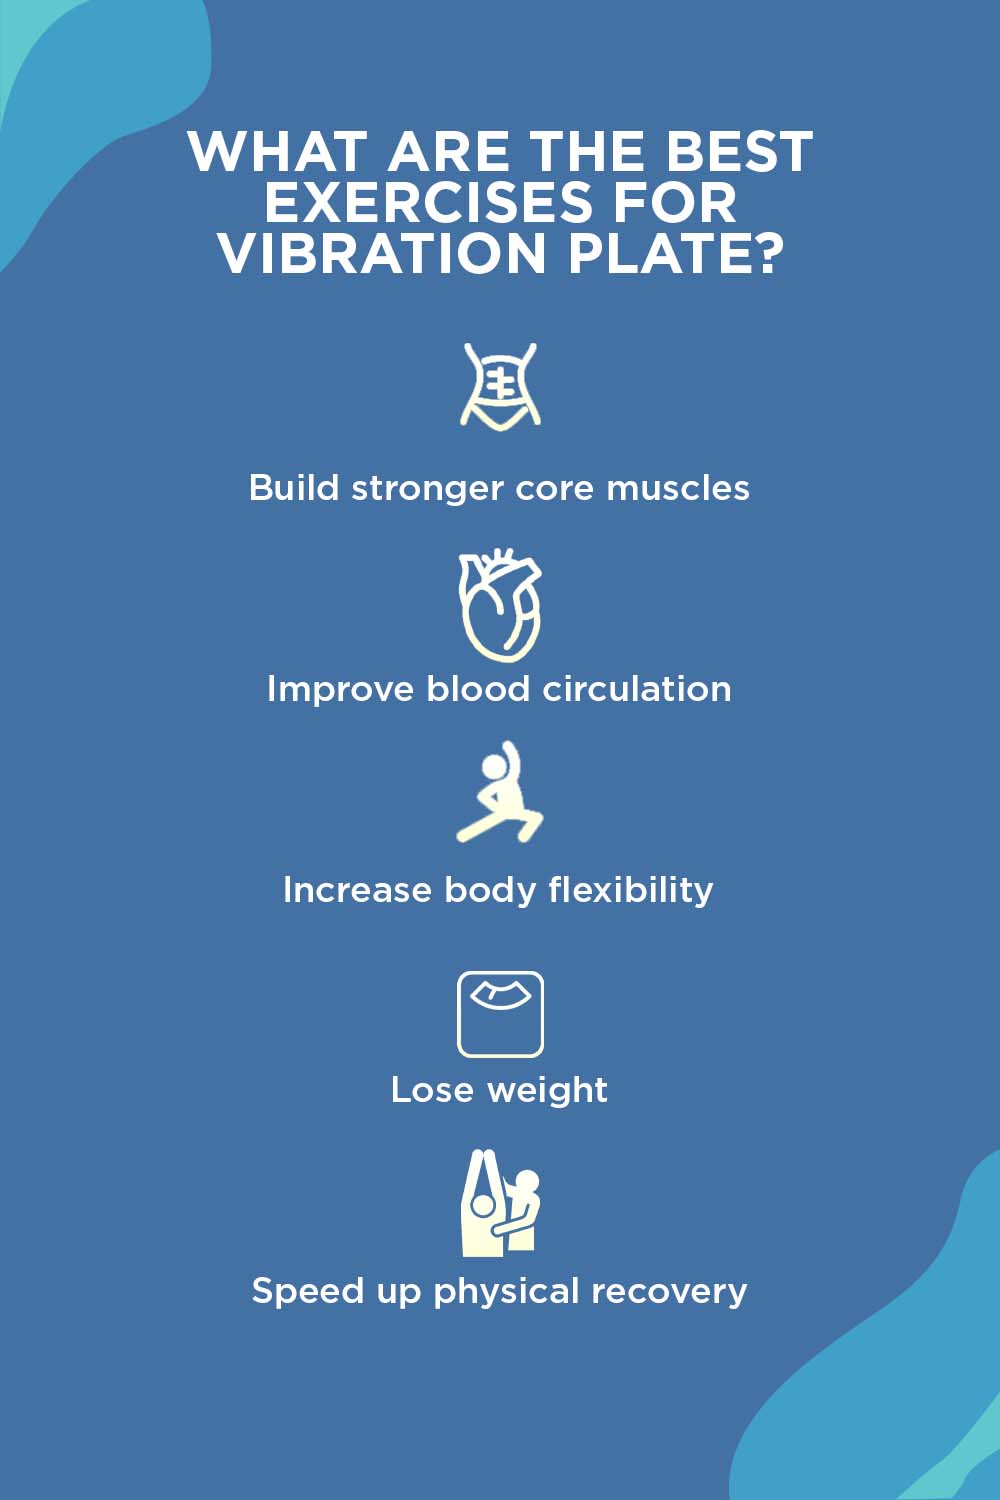 exercises for vibration plate